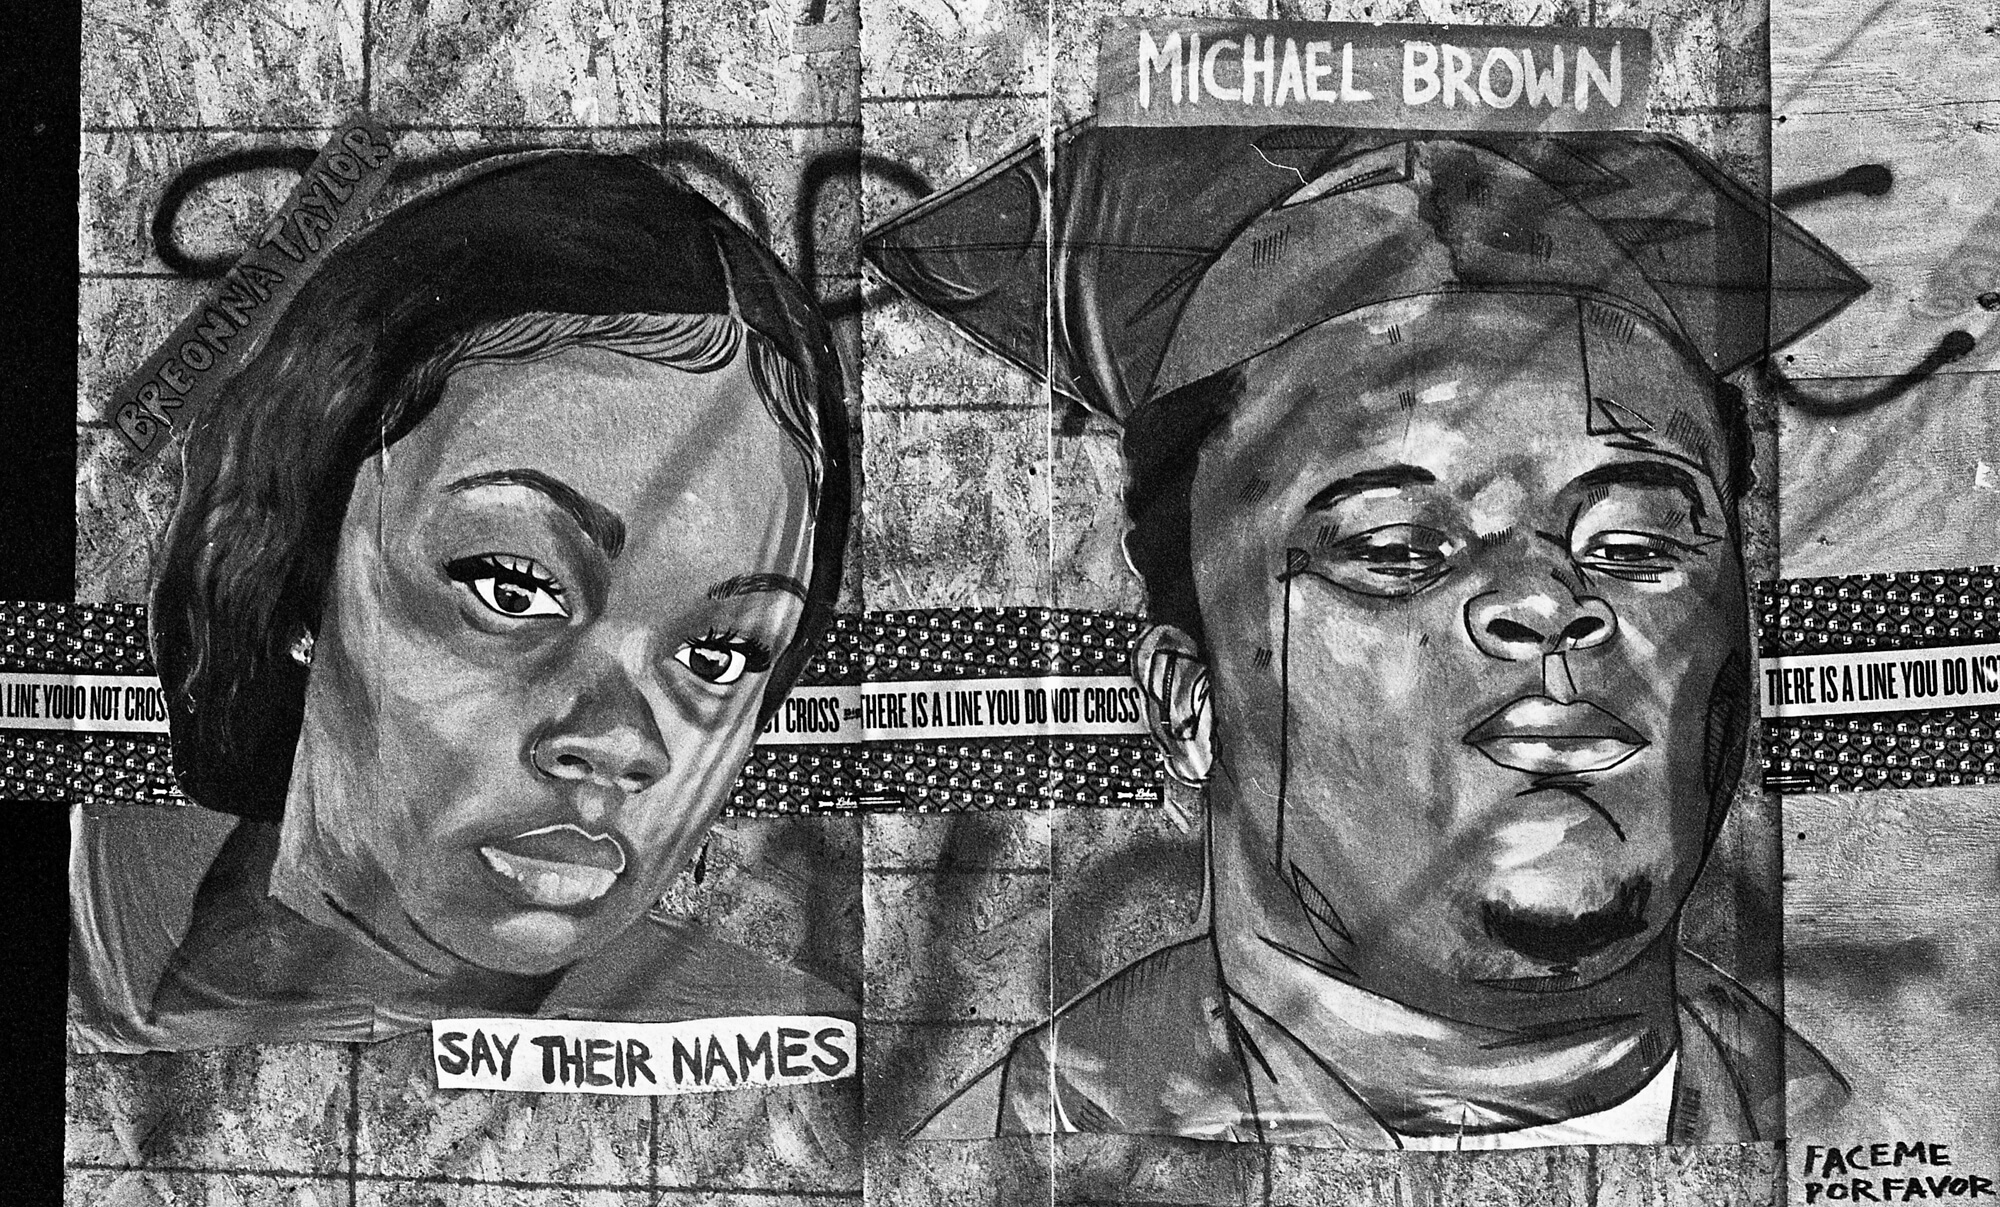 Black-and-white mural of two people killed by police